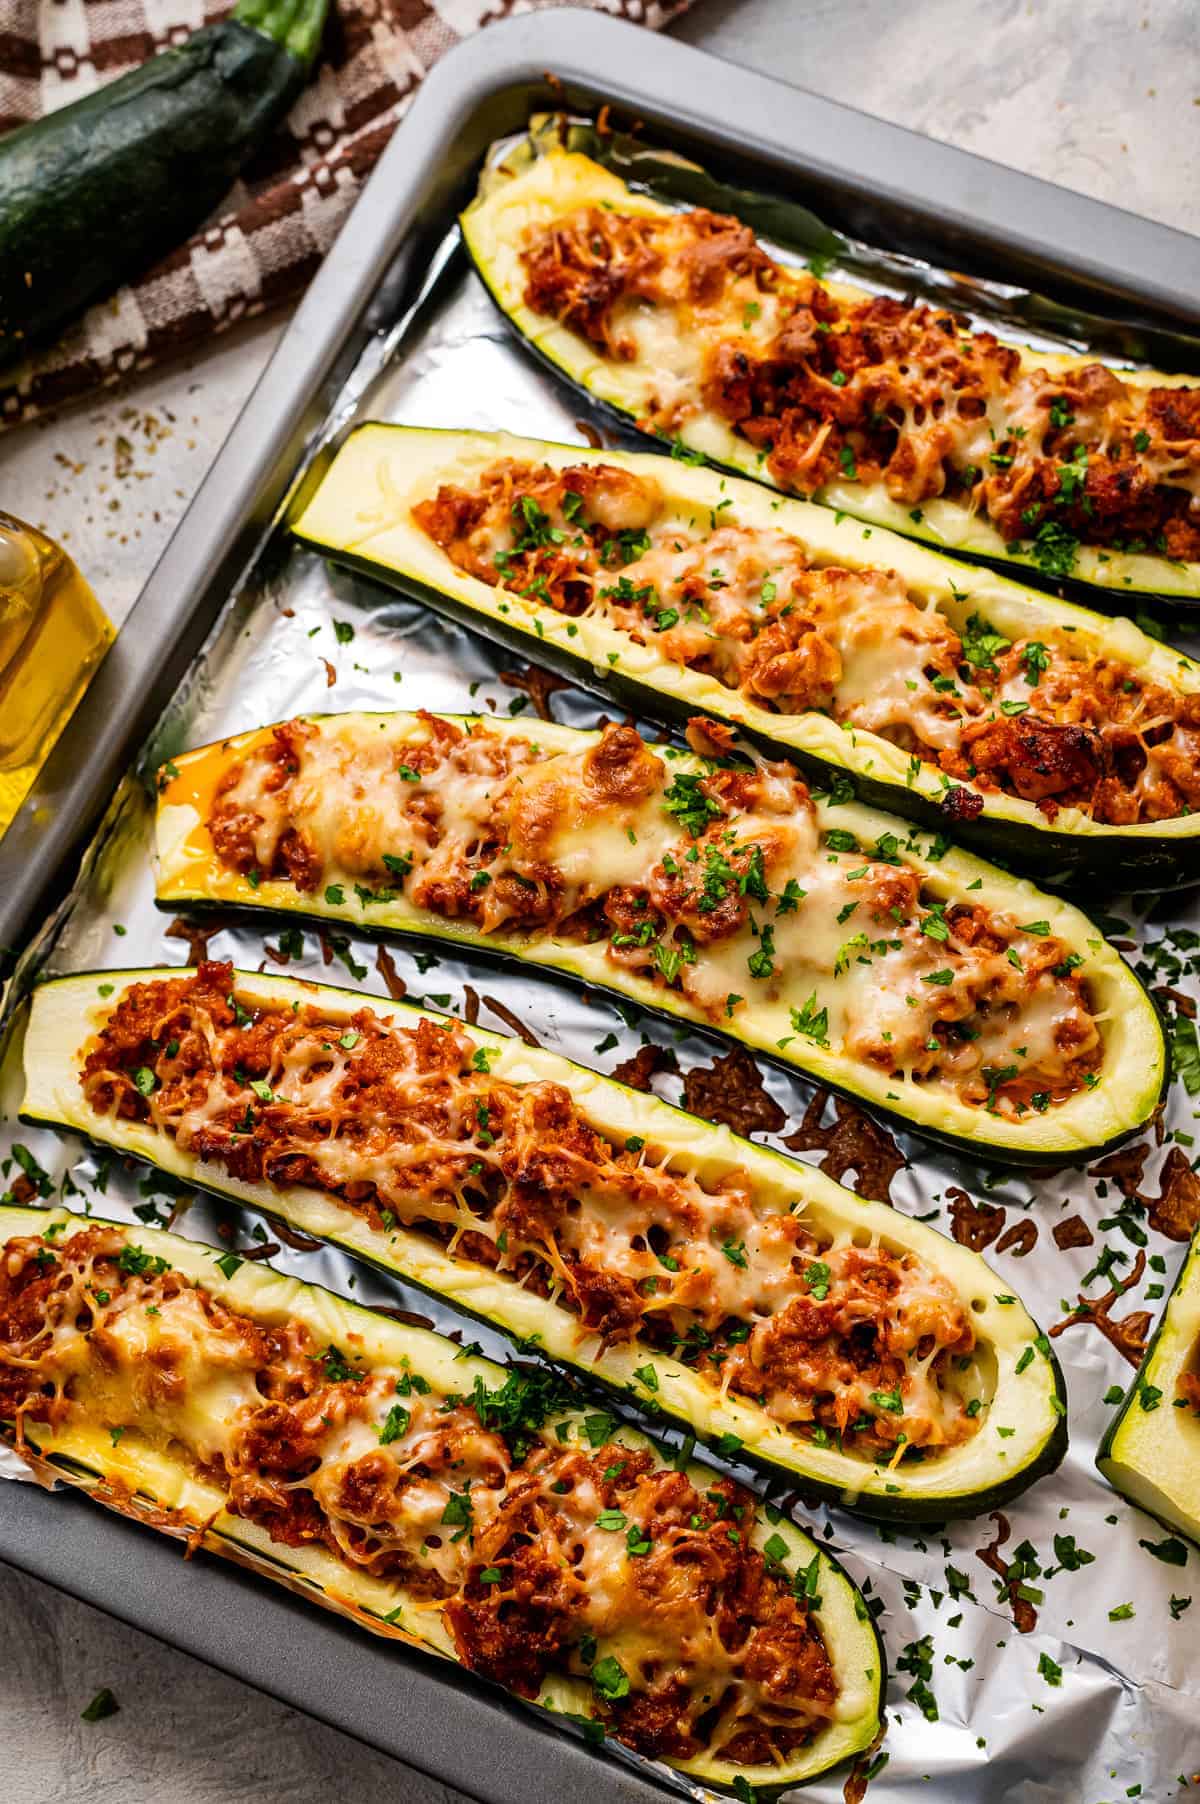 Overhead image of stuffed zucchini boats on foil lined baking sheet